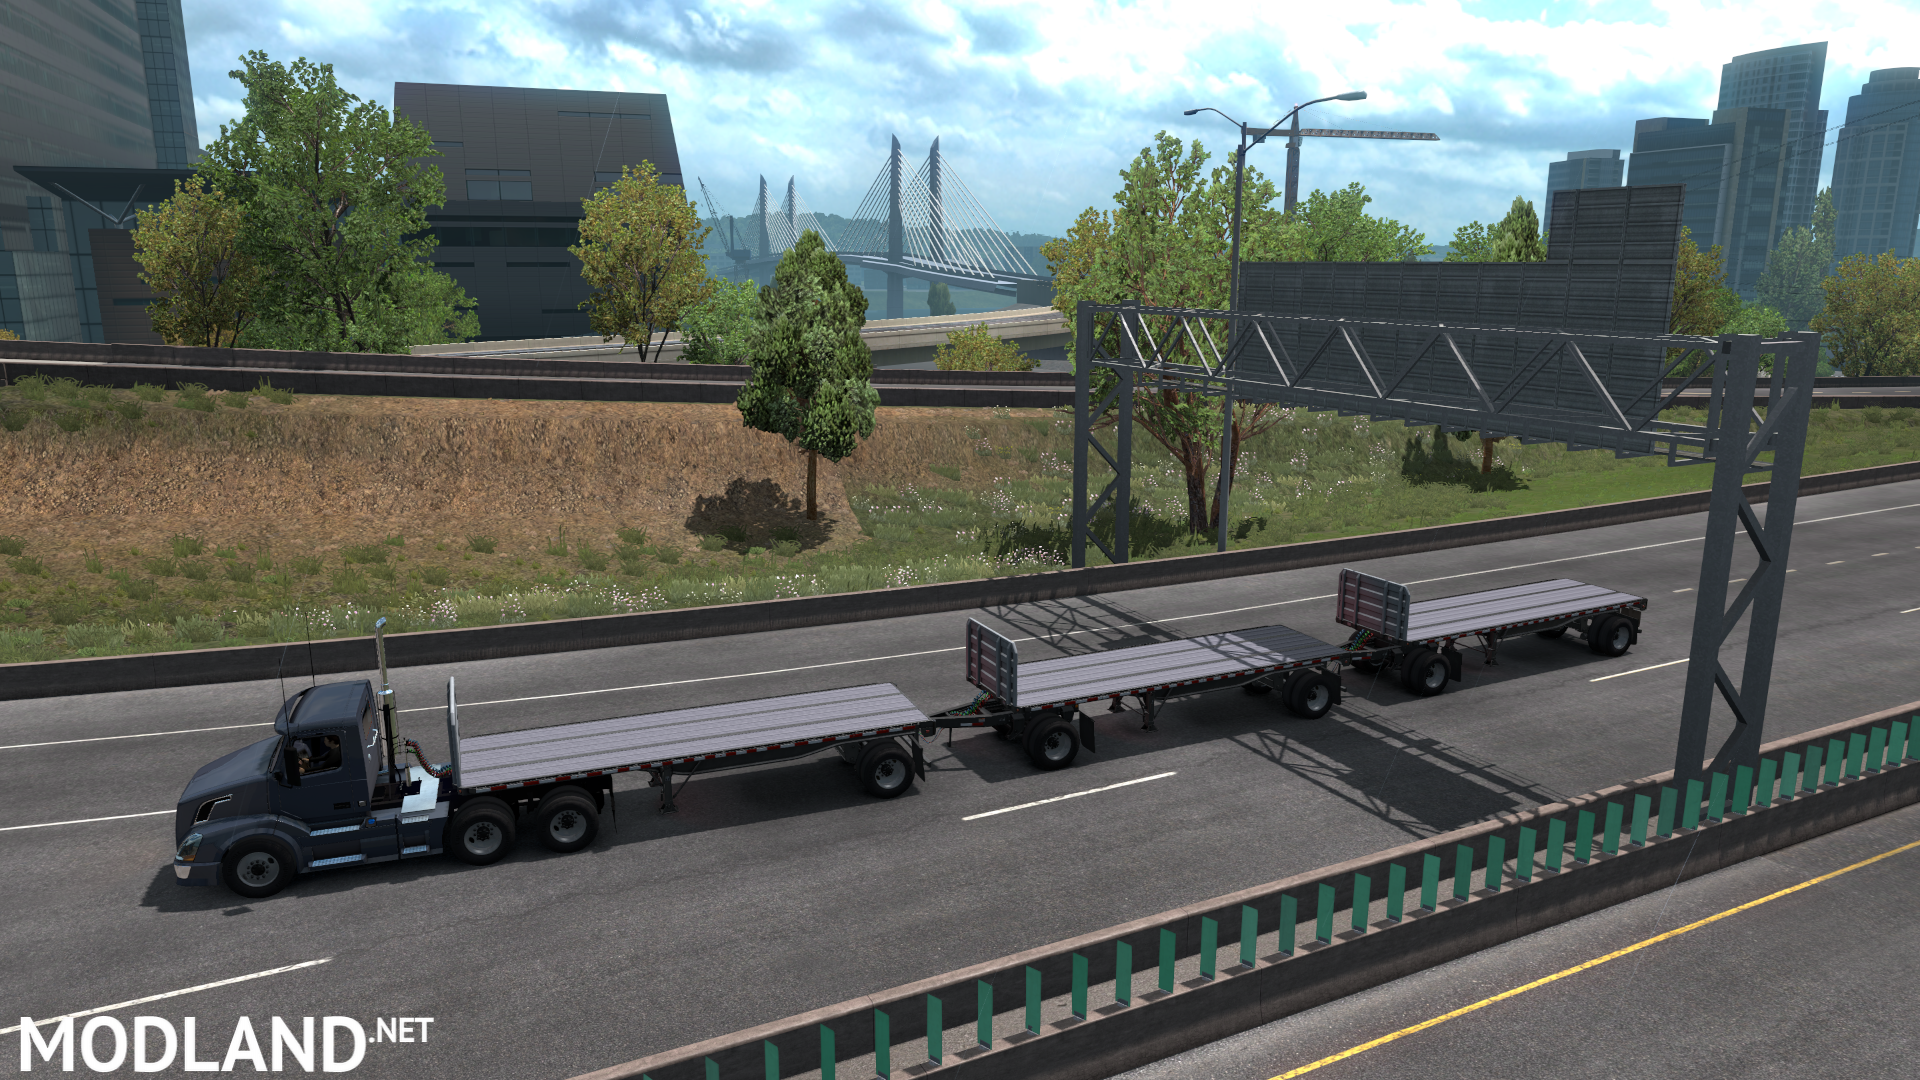 More trailers in traffic - ATS